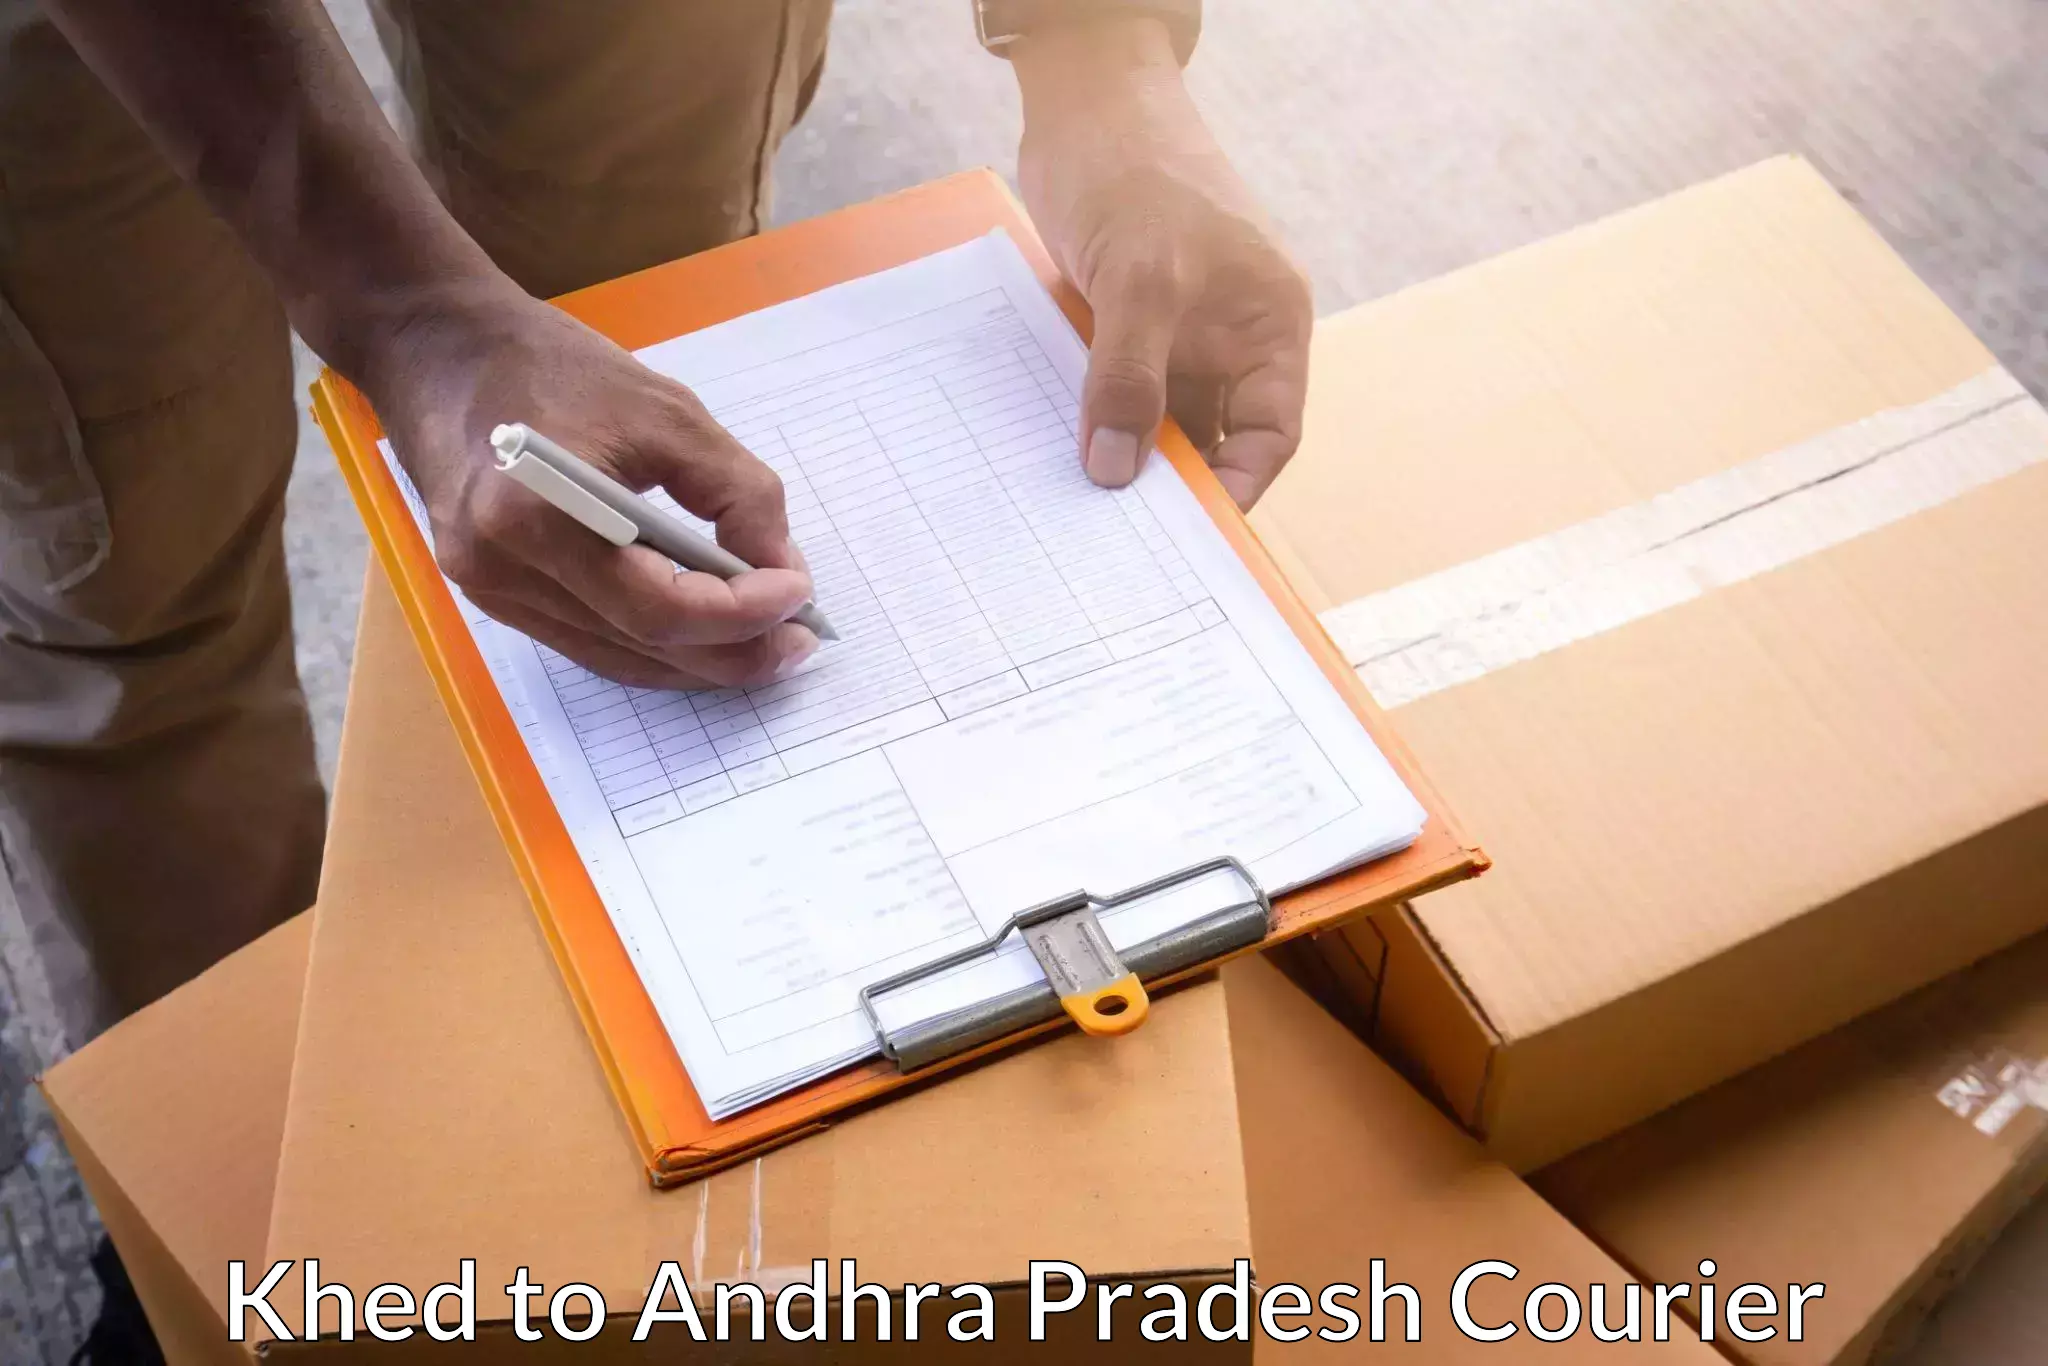 State-of-the-art courier technology Khed to Razole